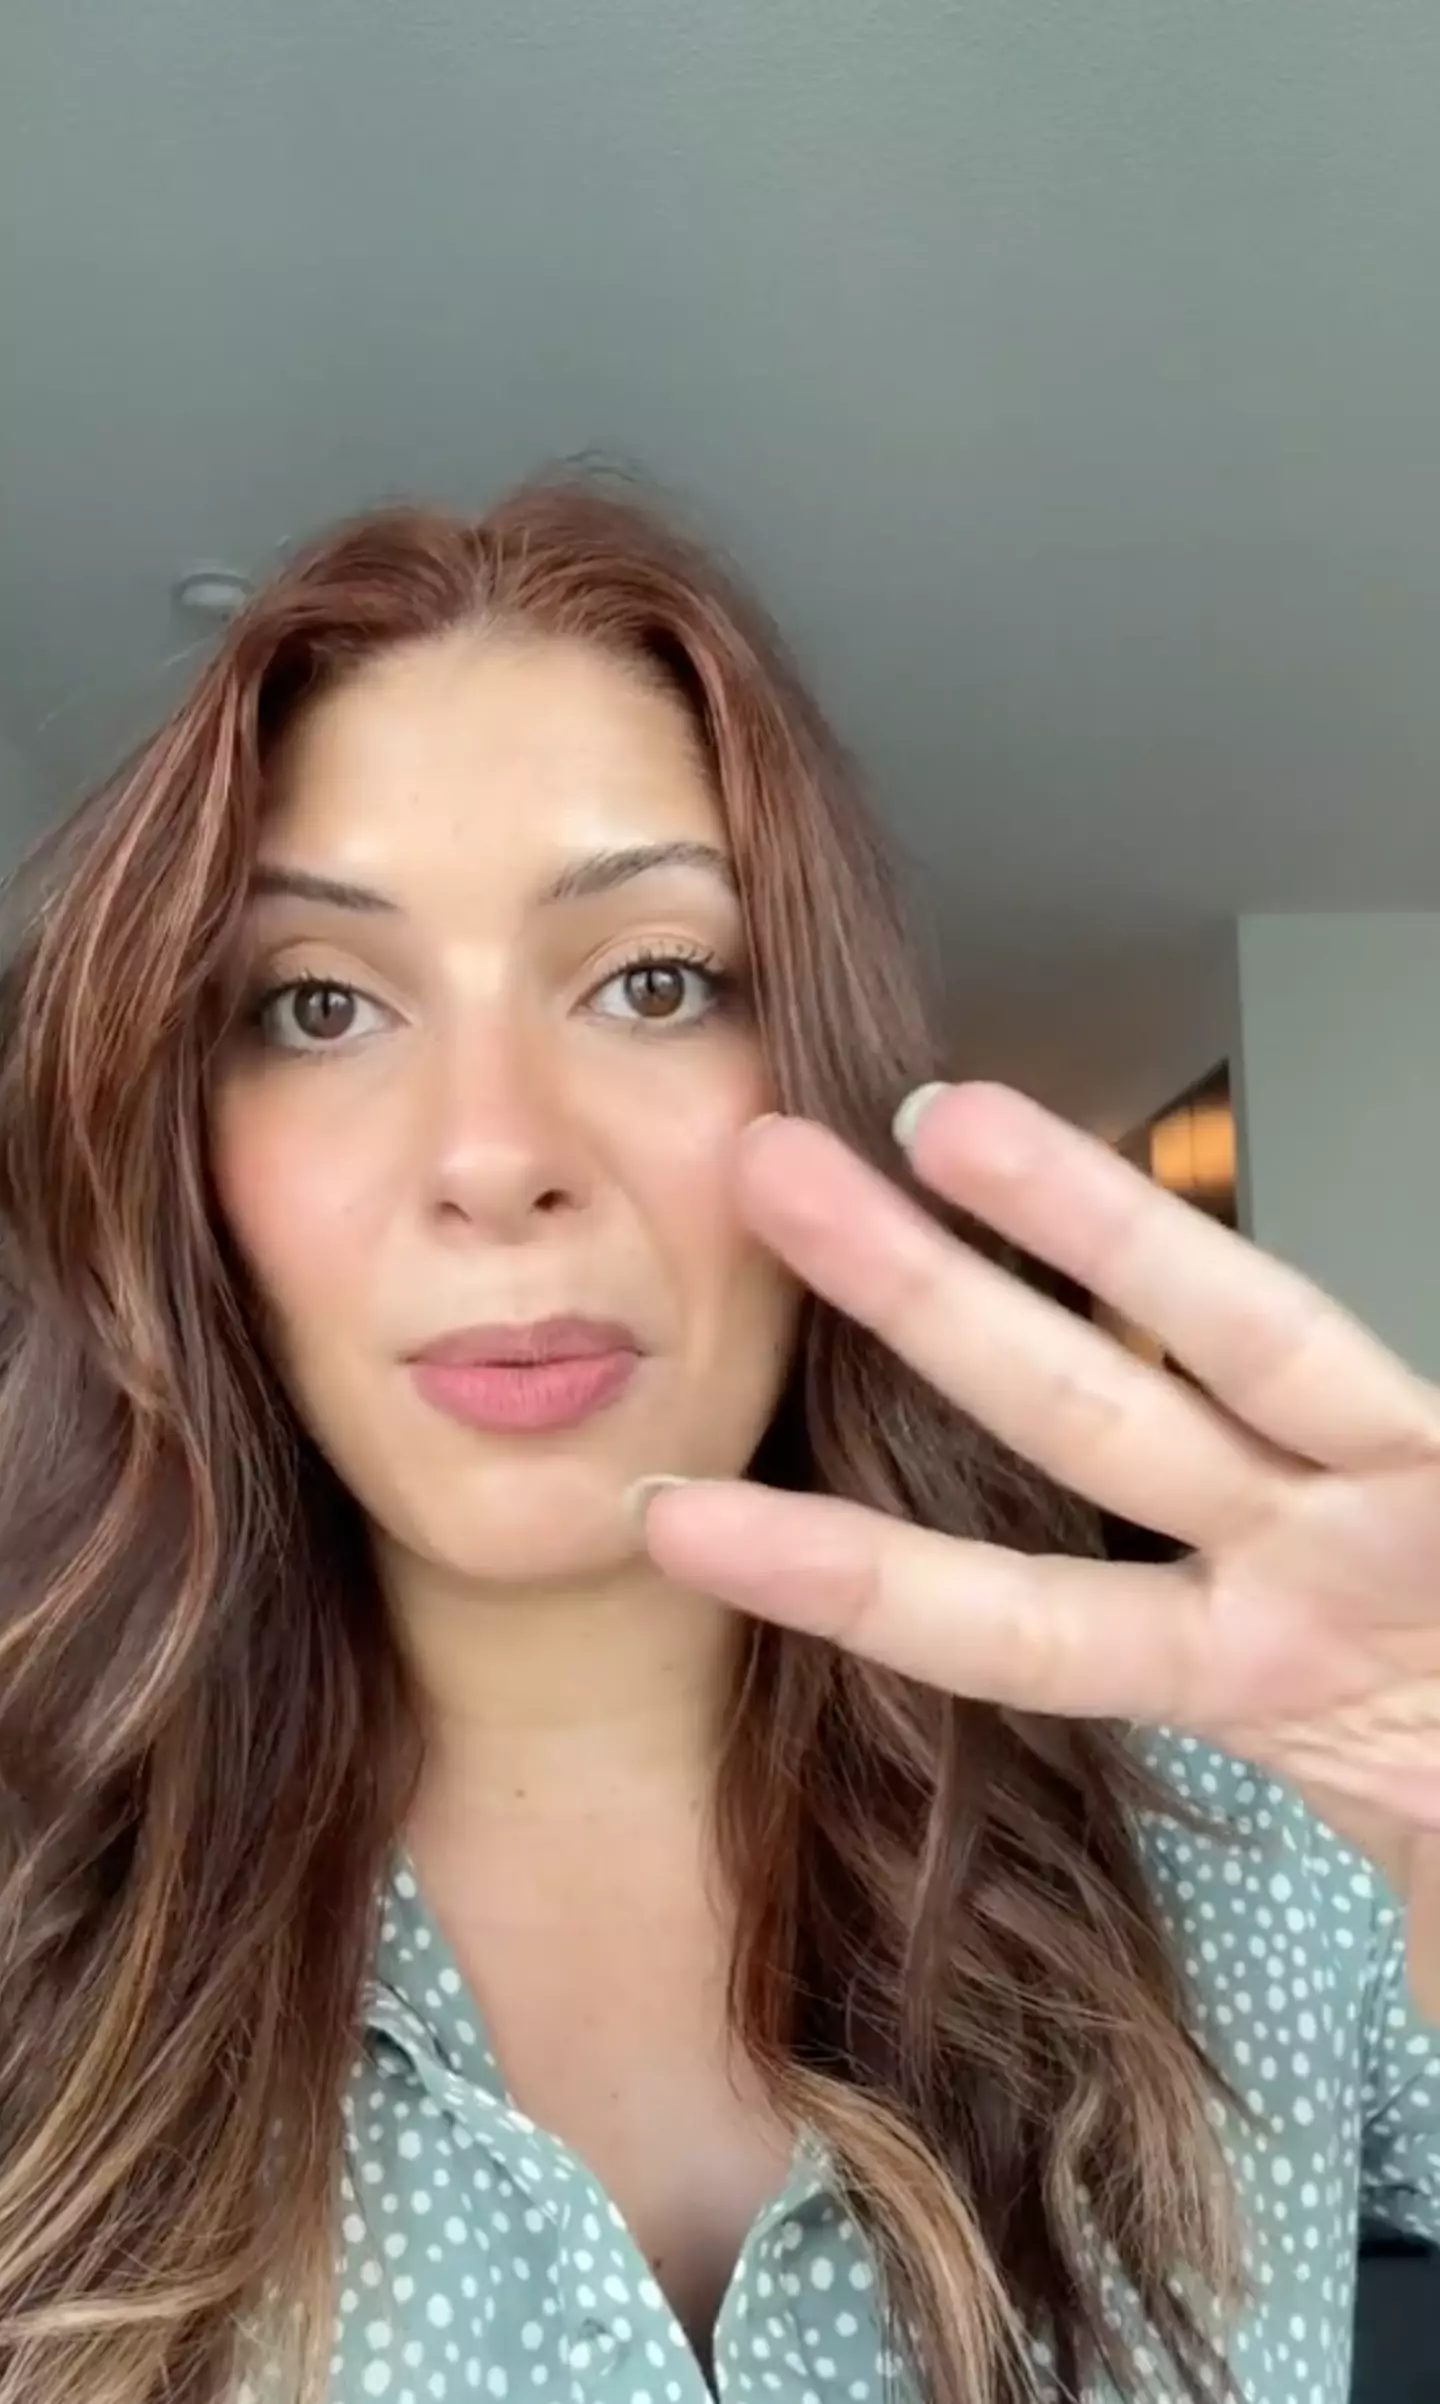 Many TikTok users believed that Emily's tip led to 'scripted and not genuine' answers.